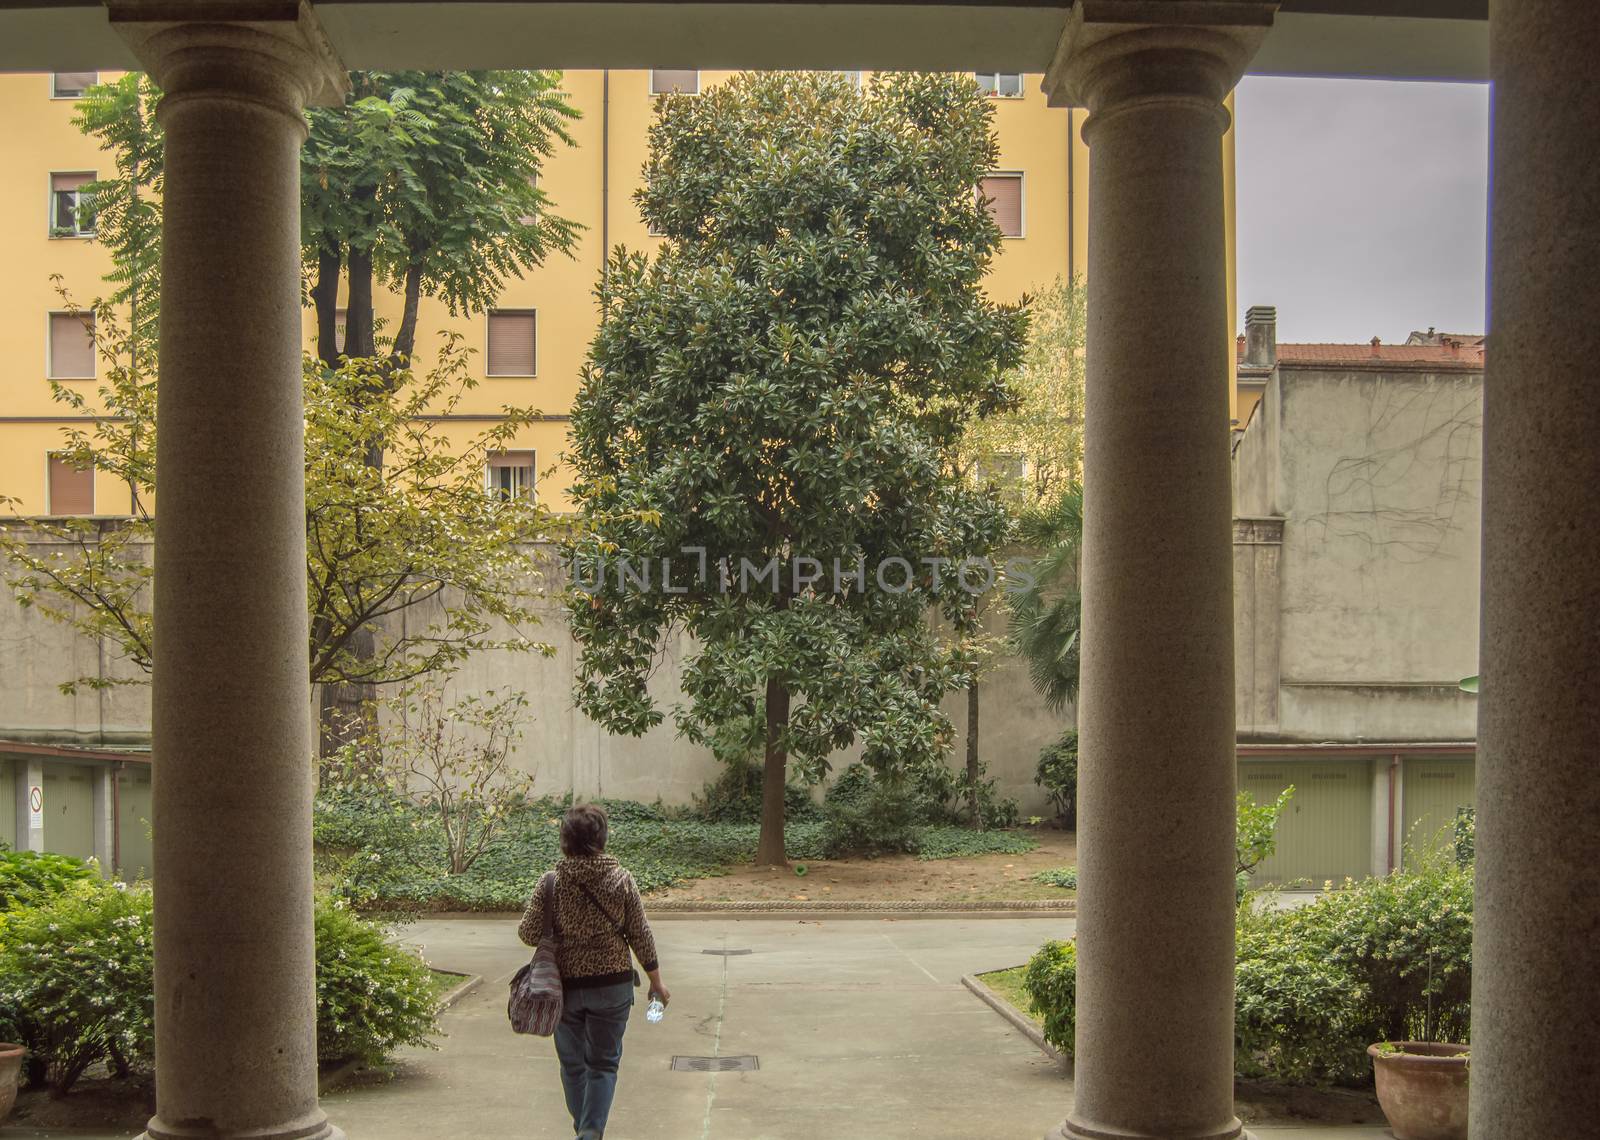 View of a female tourist from behind walking through the courtyard of an apartment building in Milan, Italy, early morning.